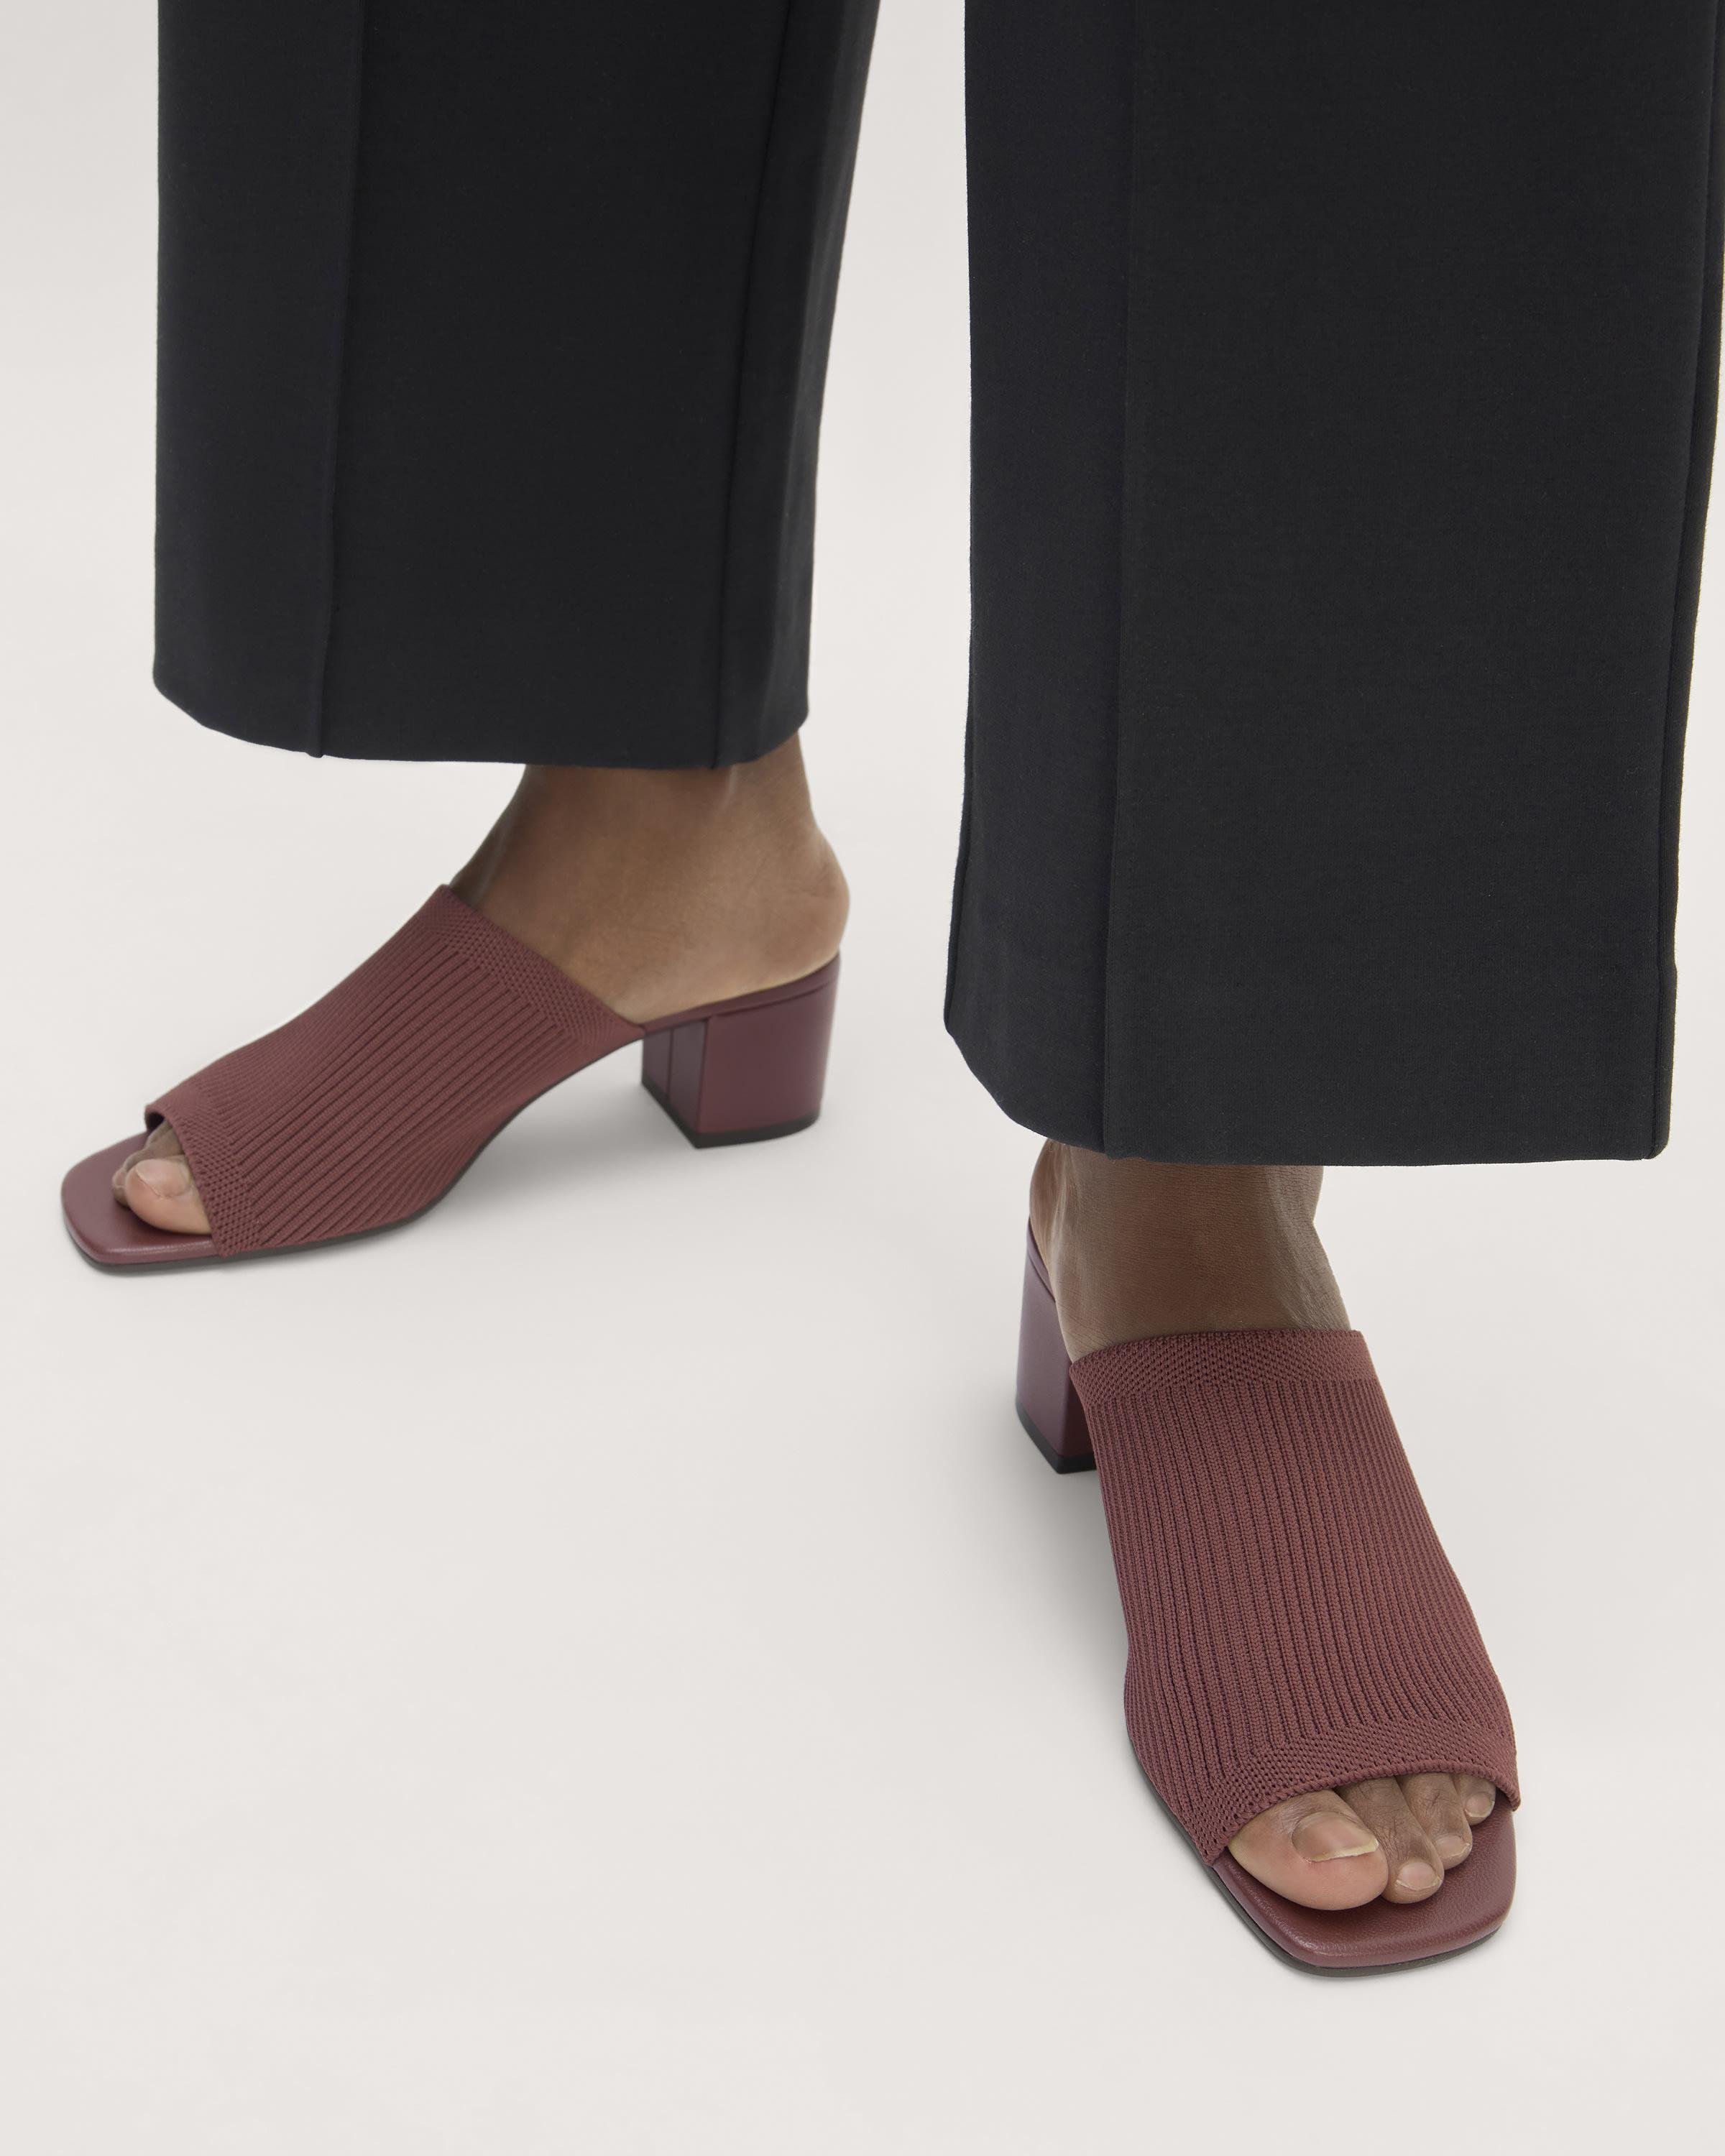 The Glove Mule in ReKnit by EVERLANE